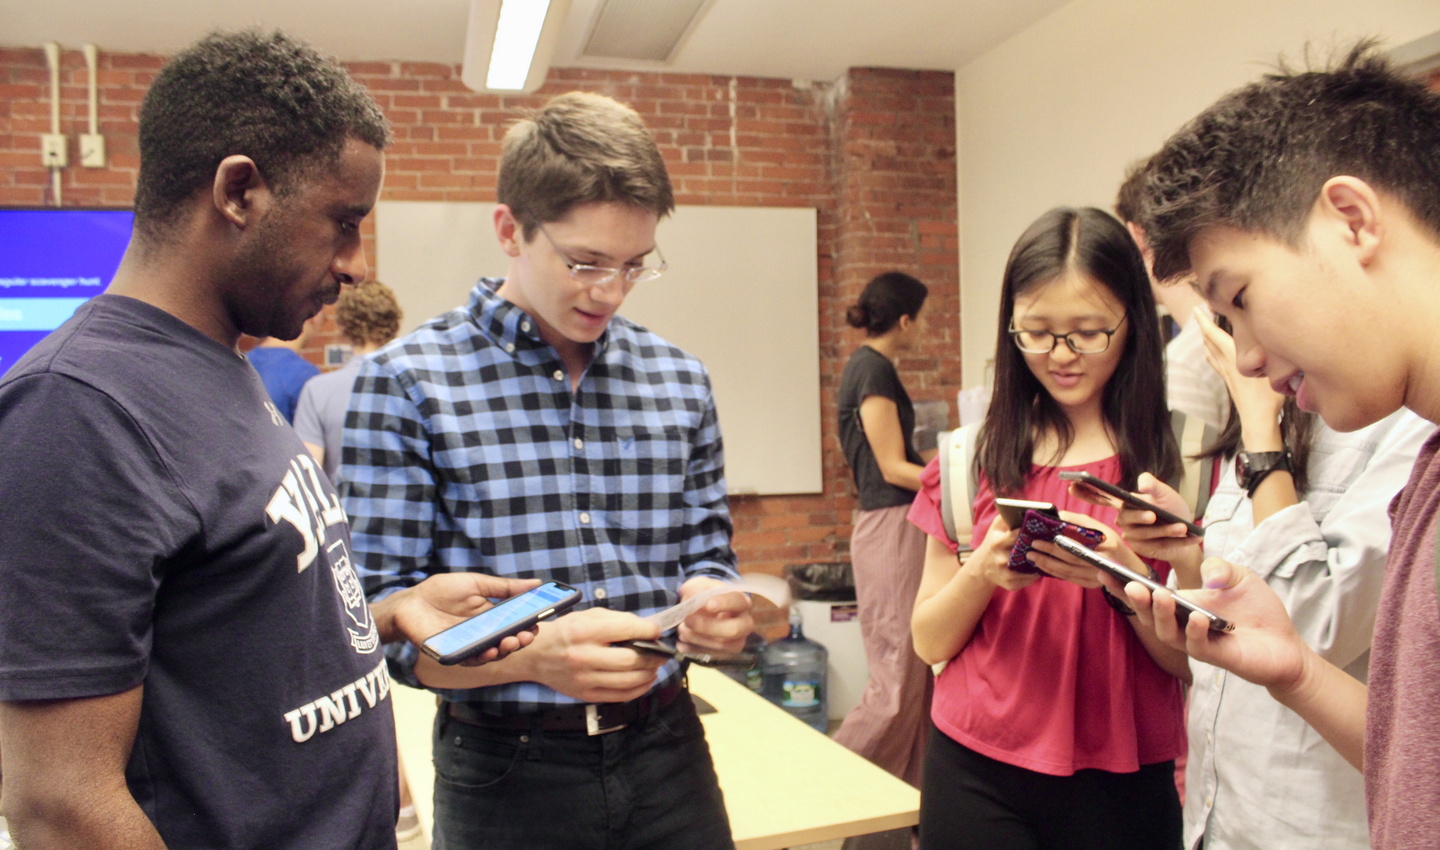 Four students look at phones